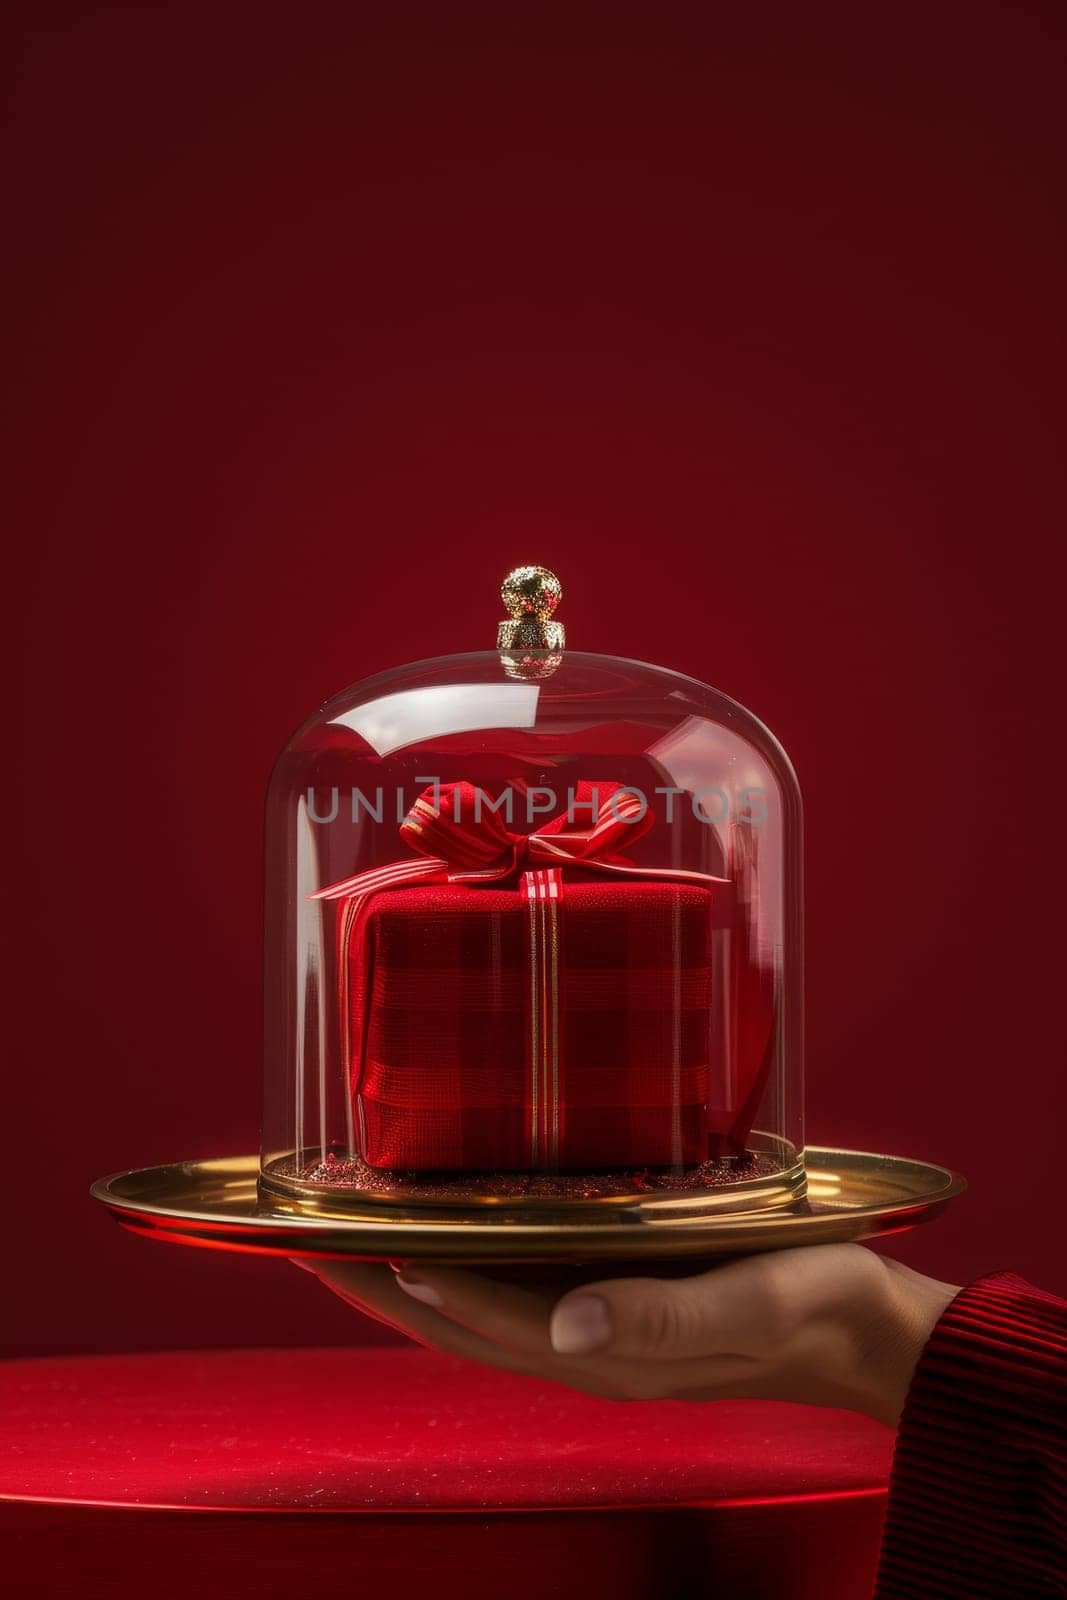 A person is holding a red box with a bow on top of a gold tray. The image has a warm and festive mood, suggesting that it could be a gift for a special occasion